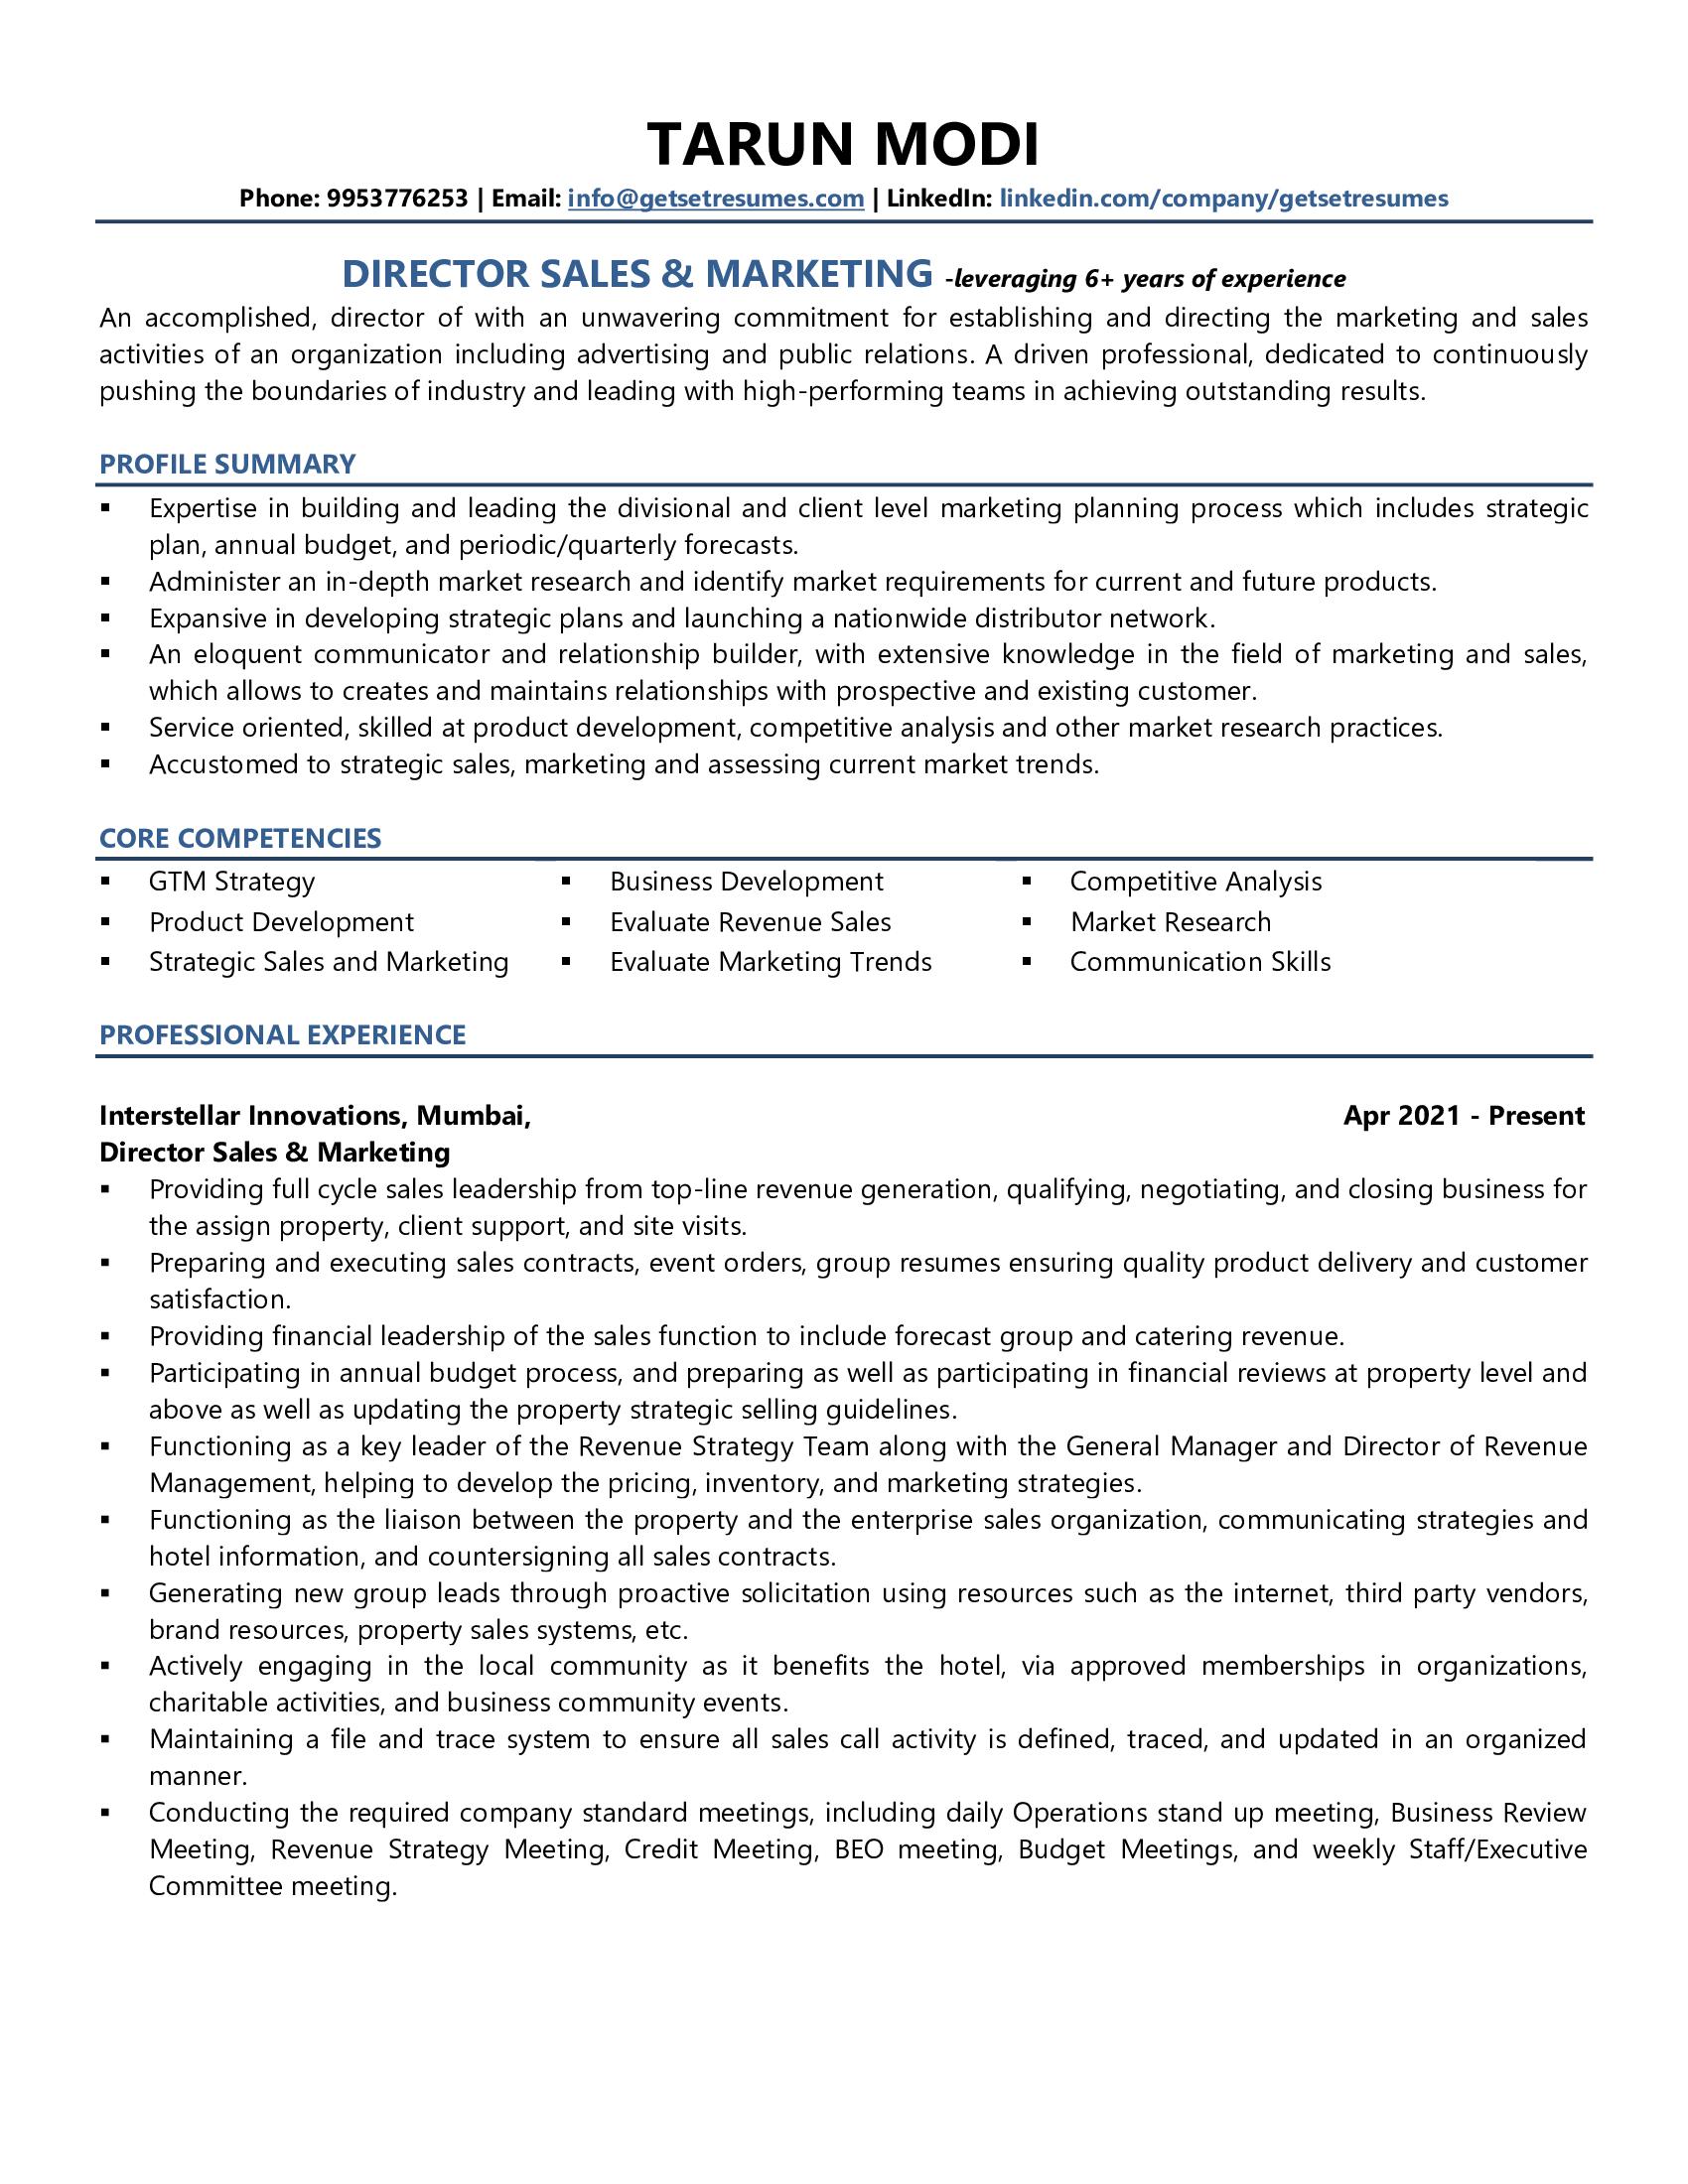 Director of Sales & Marketing - Resume Example & Template